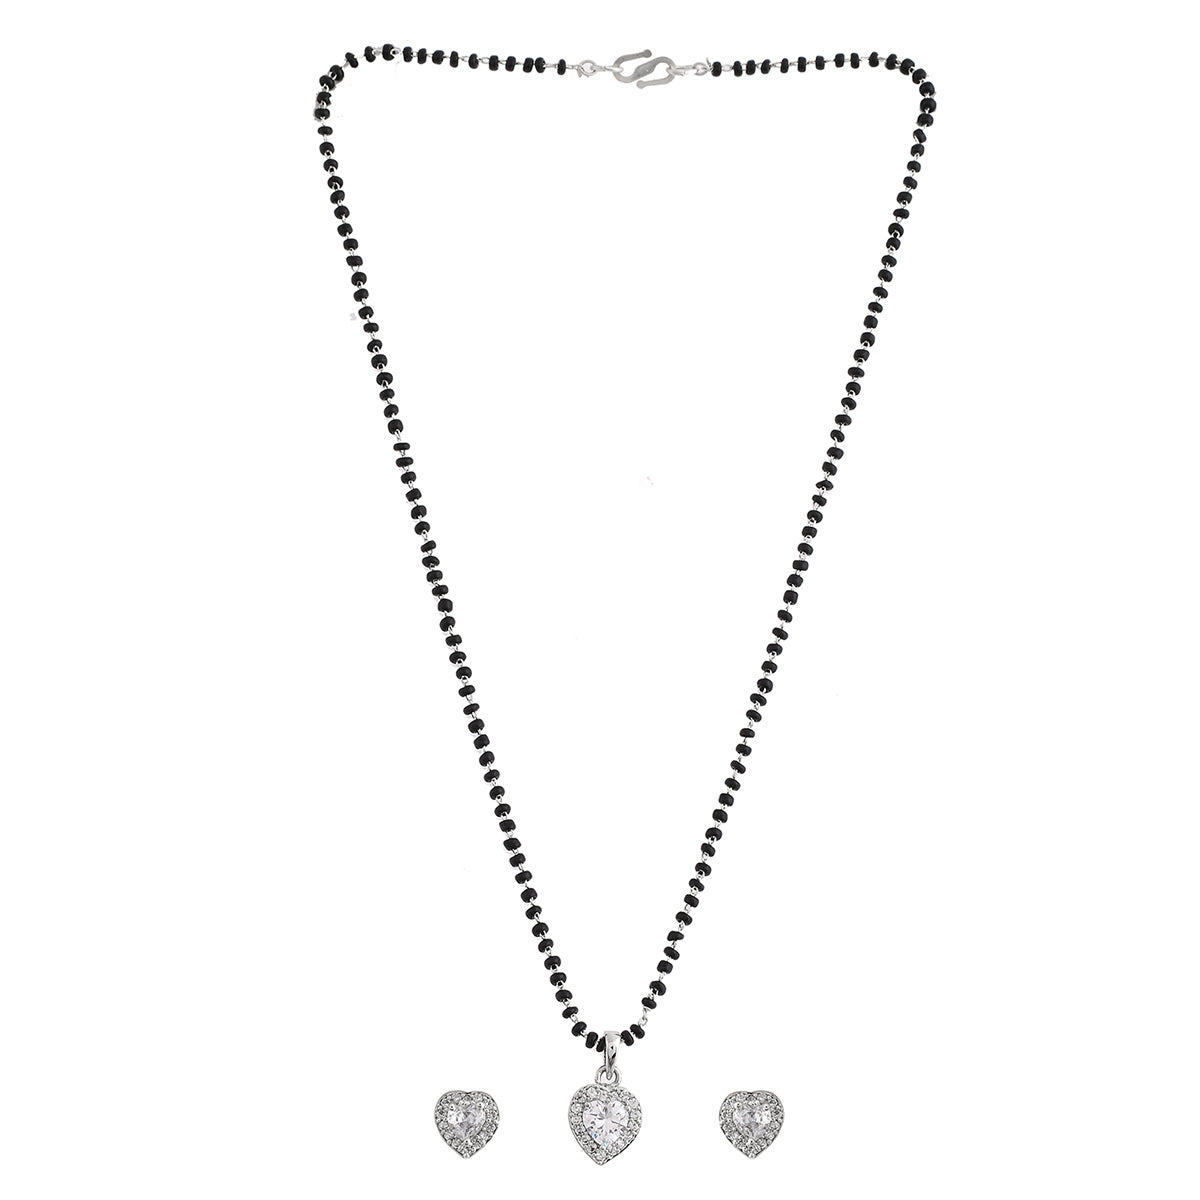 Women's Sparkling Essential White Heart Shaped Cz Studded Silver Magalsutra - Voylla